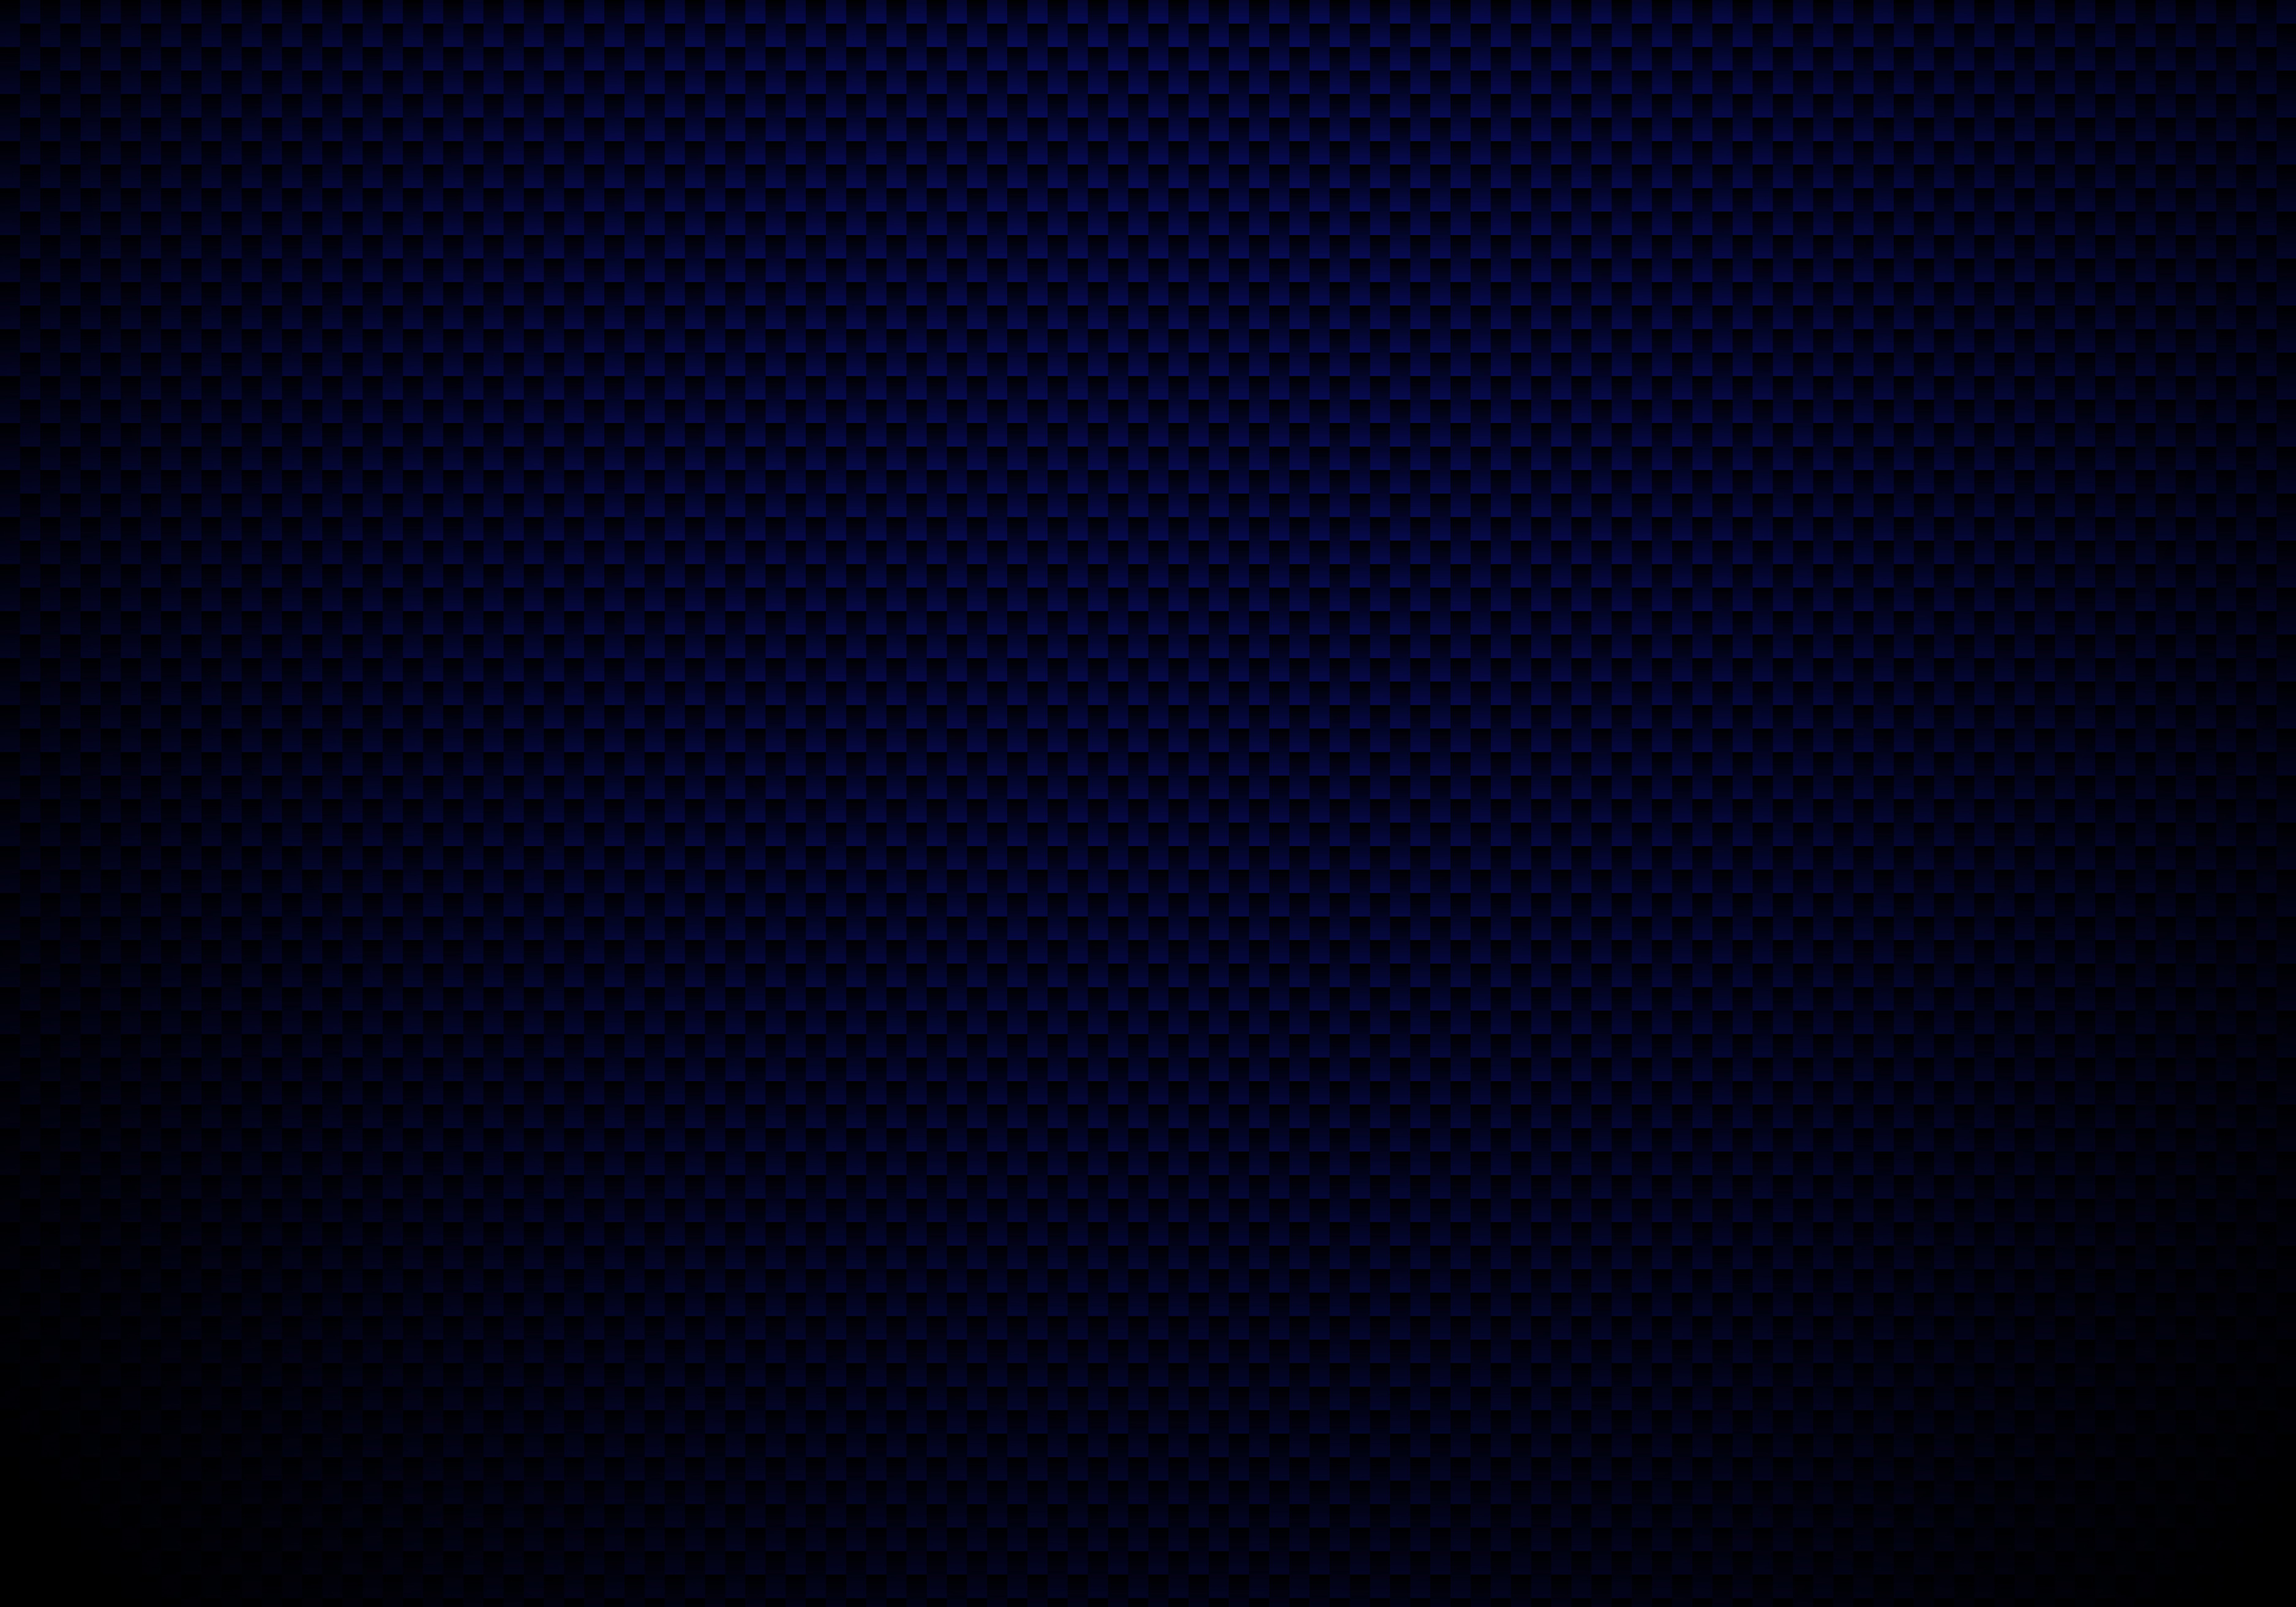 Dark Blue Carbon Fiber Background And Texture With Lighting